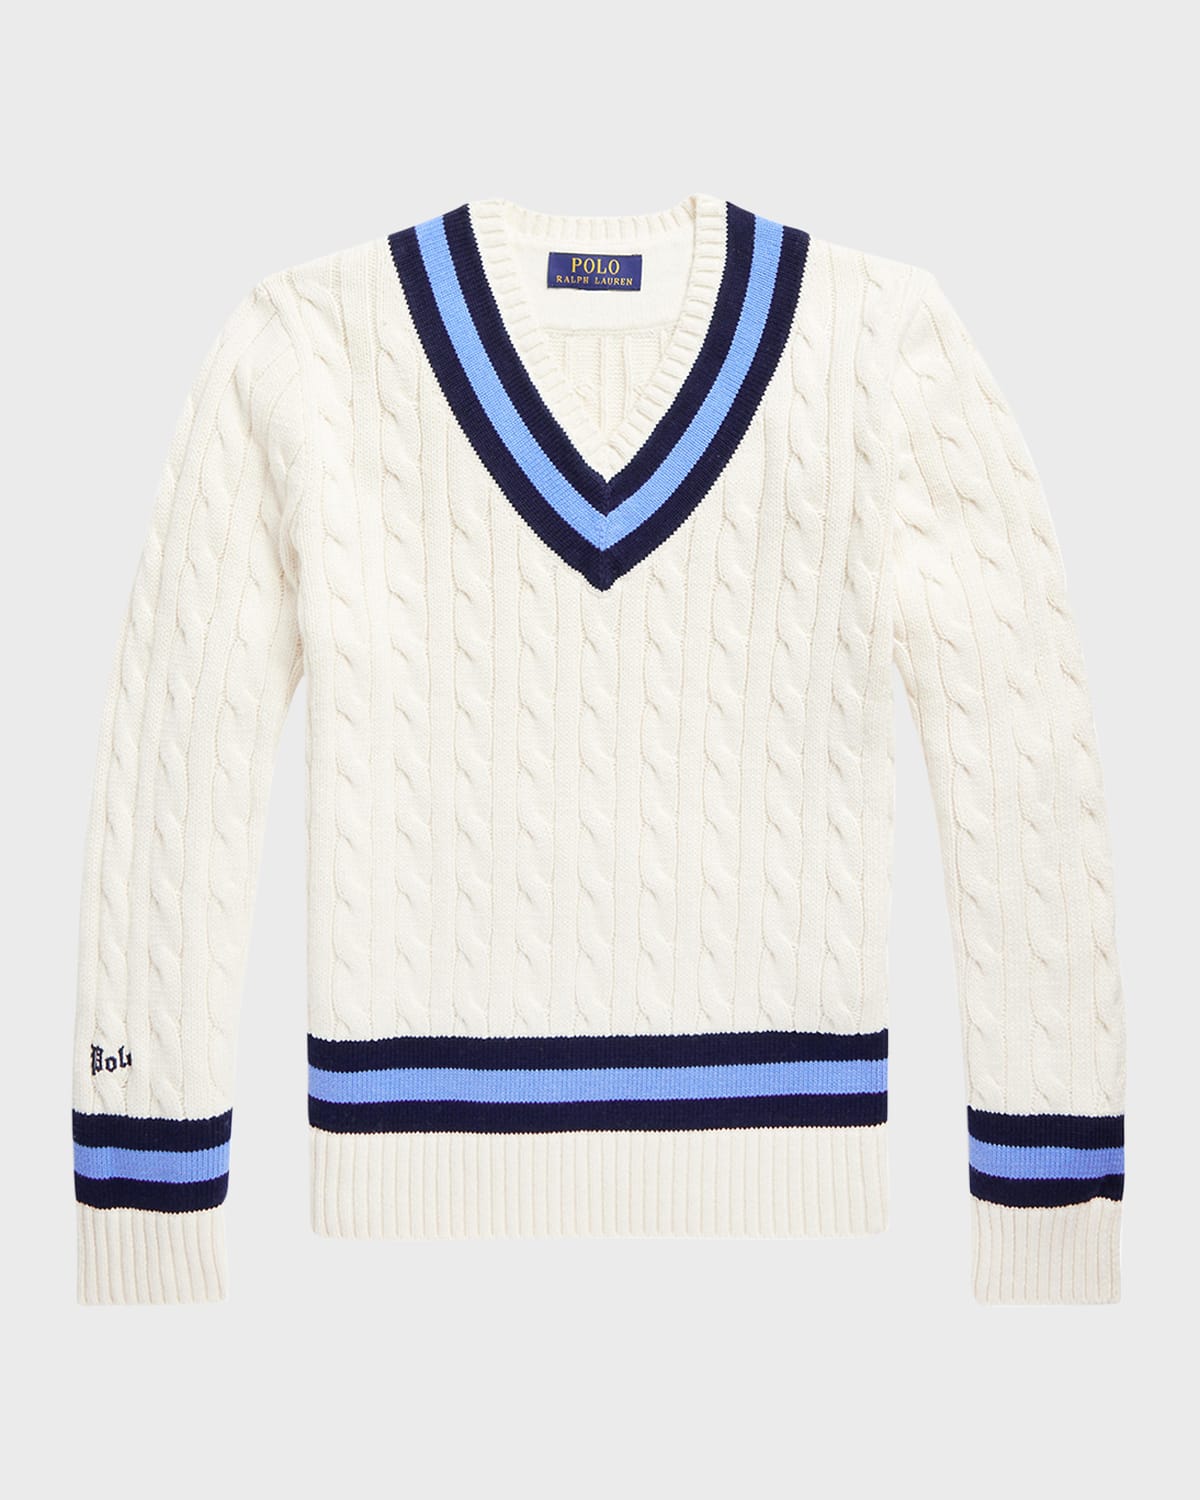 Boy's Cable Knit Striped Trim Sweater, Size S-XL